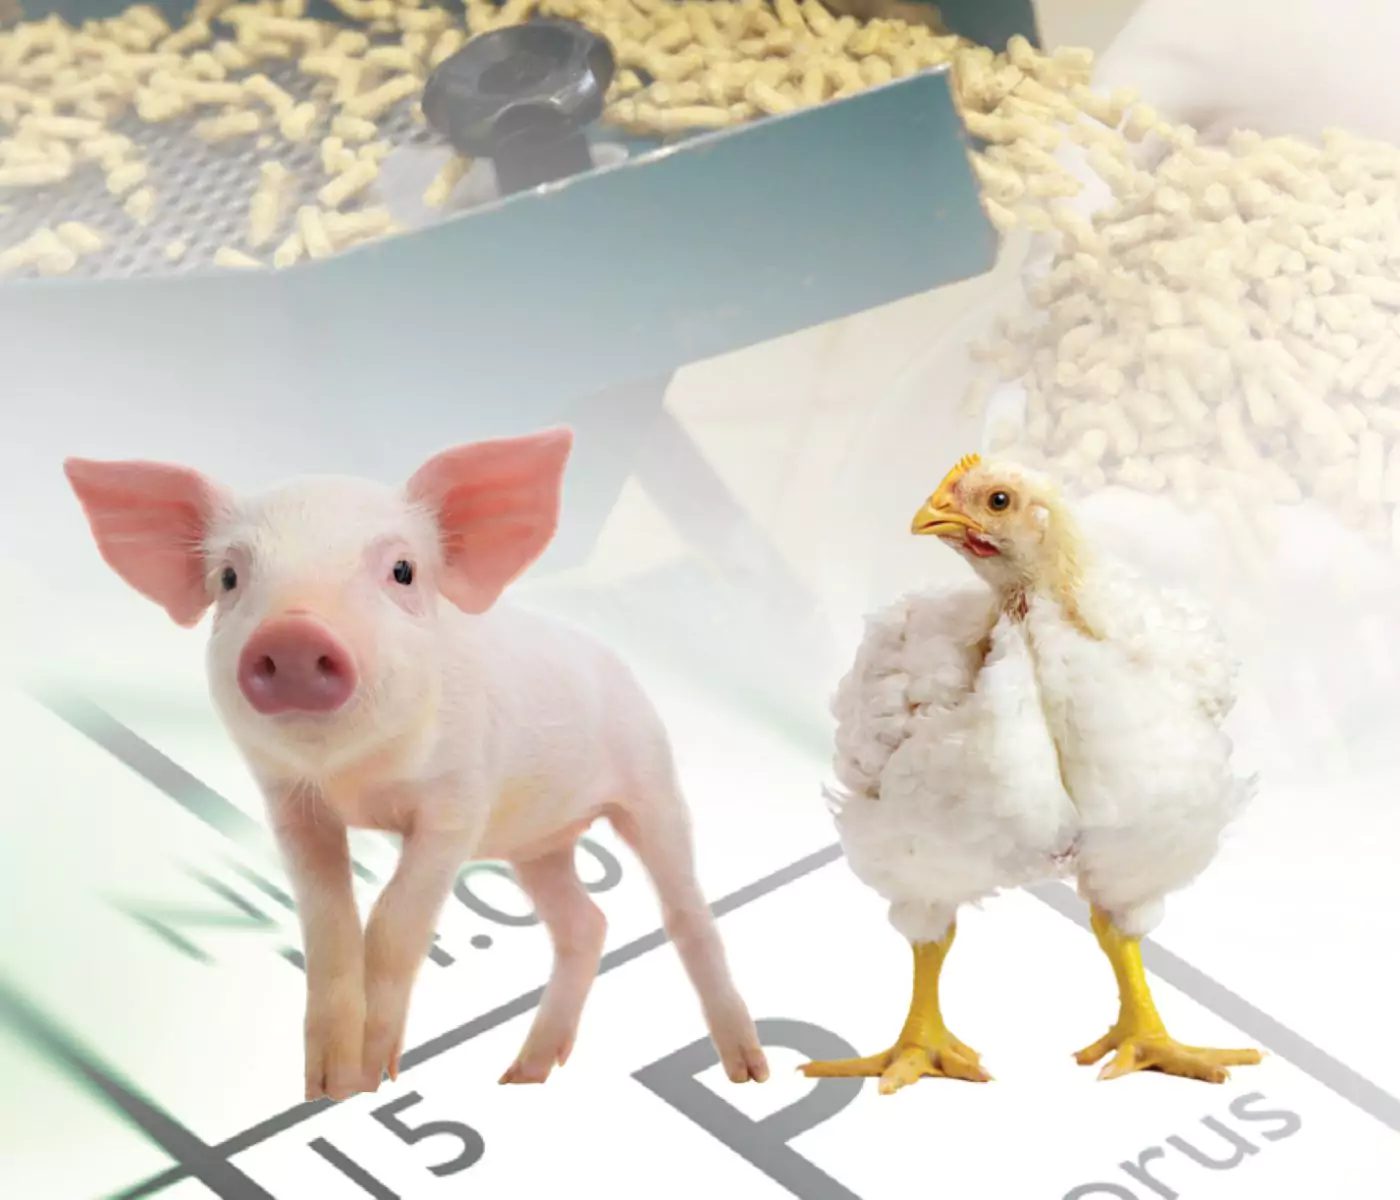 The 5th Edition of the Brazilian Tables for Poultry and Swine